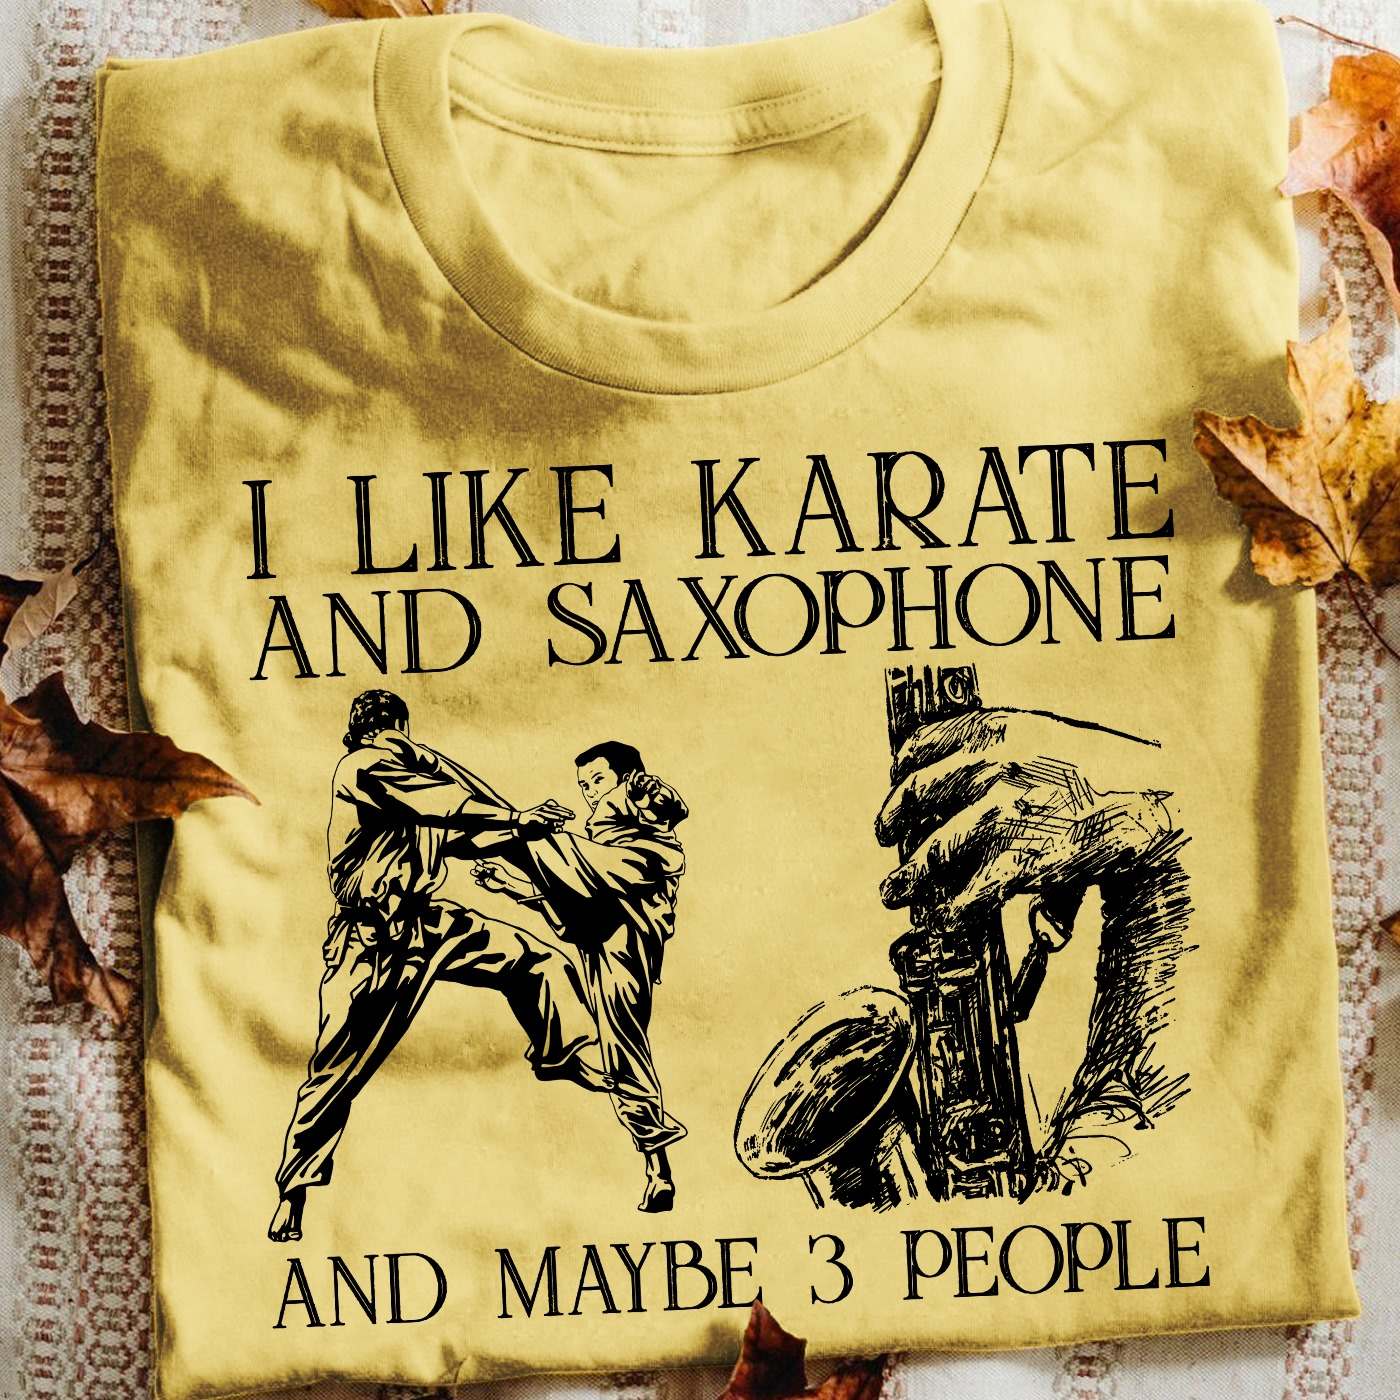 I like karate and saxophone and maybe 3 people - Love playing saxophone